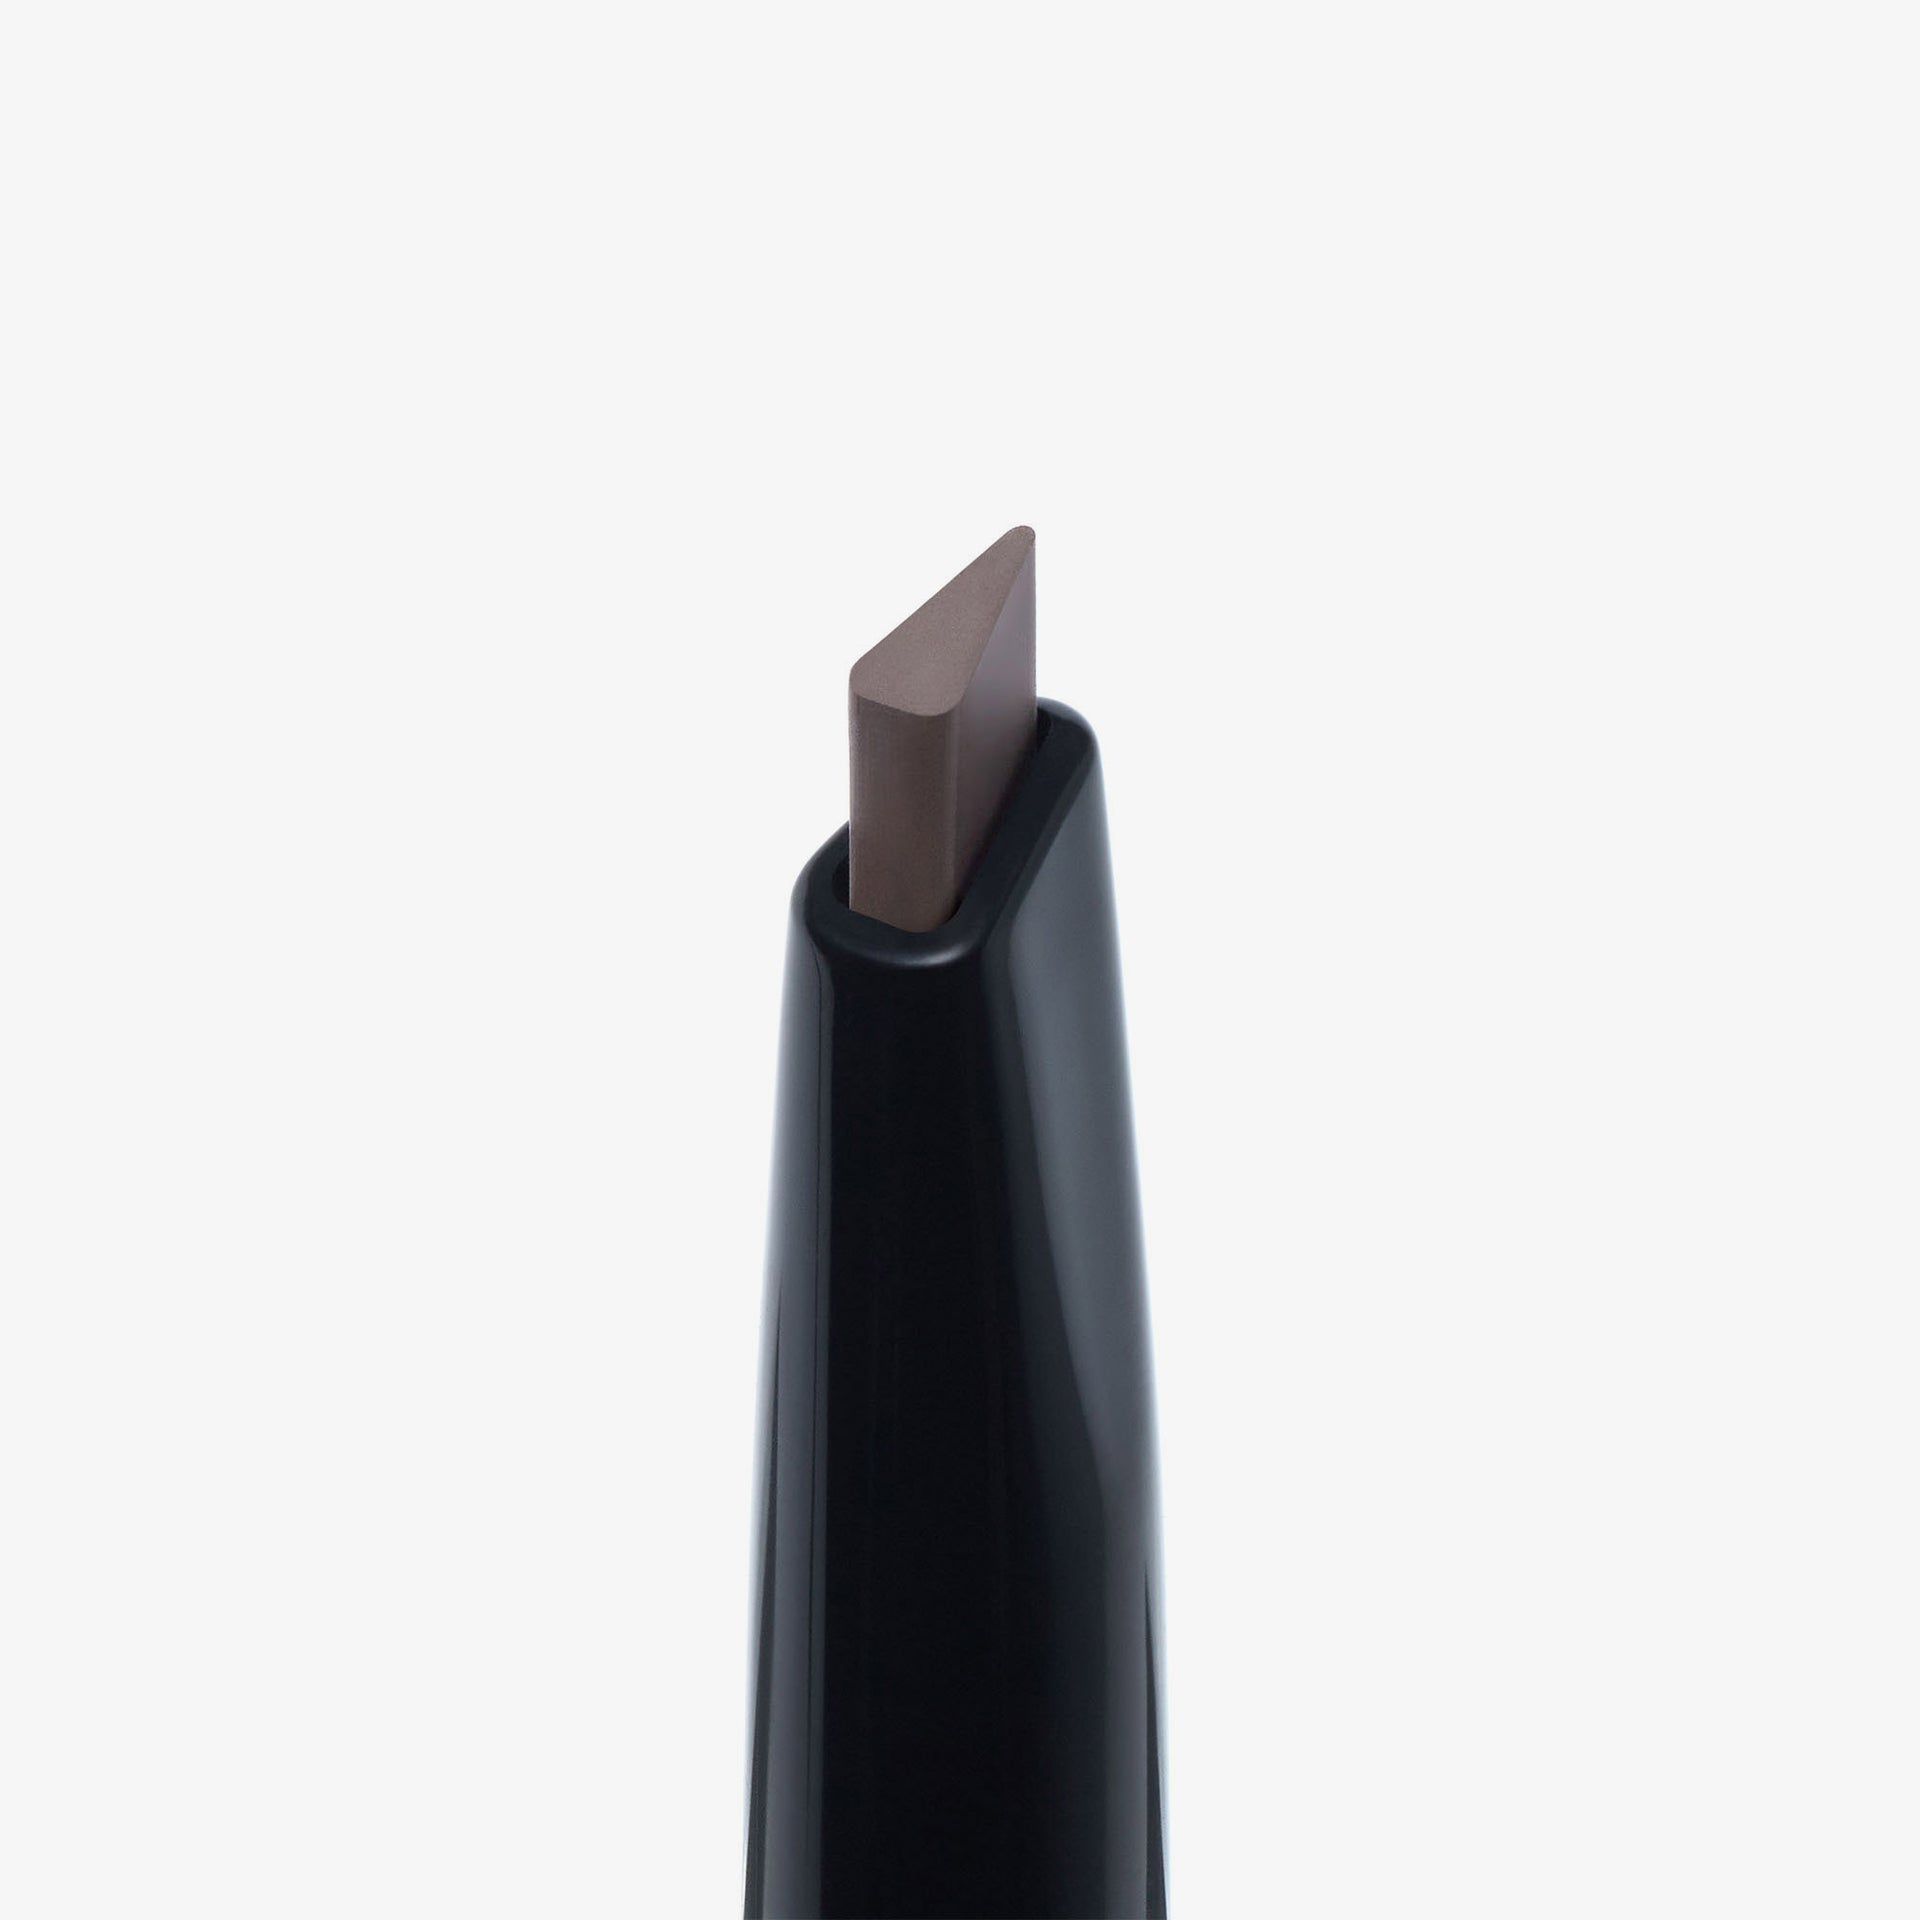 Taupe | Brow Definer - Taupe 